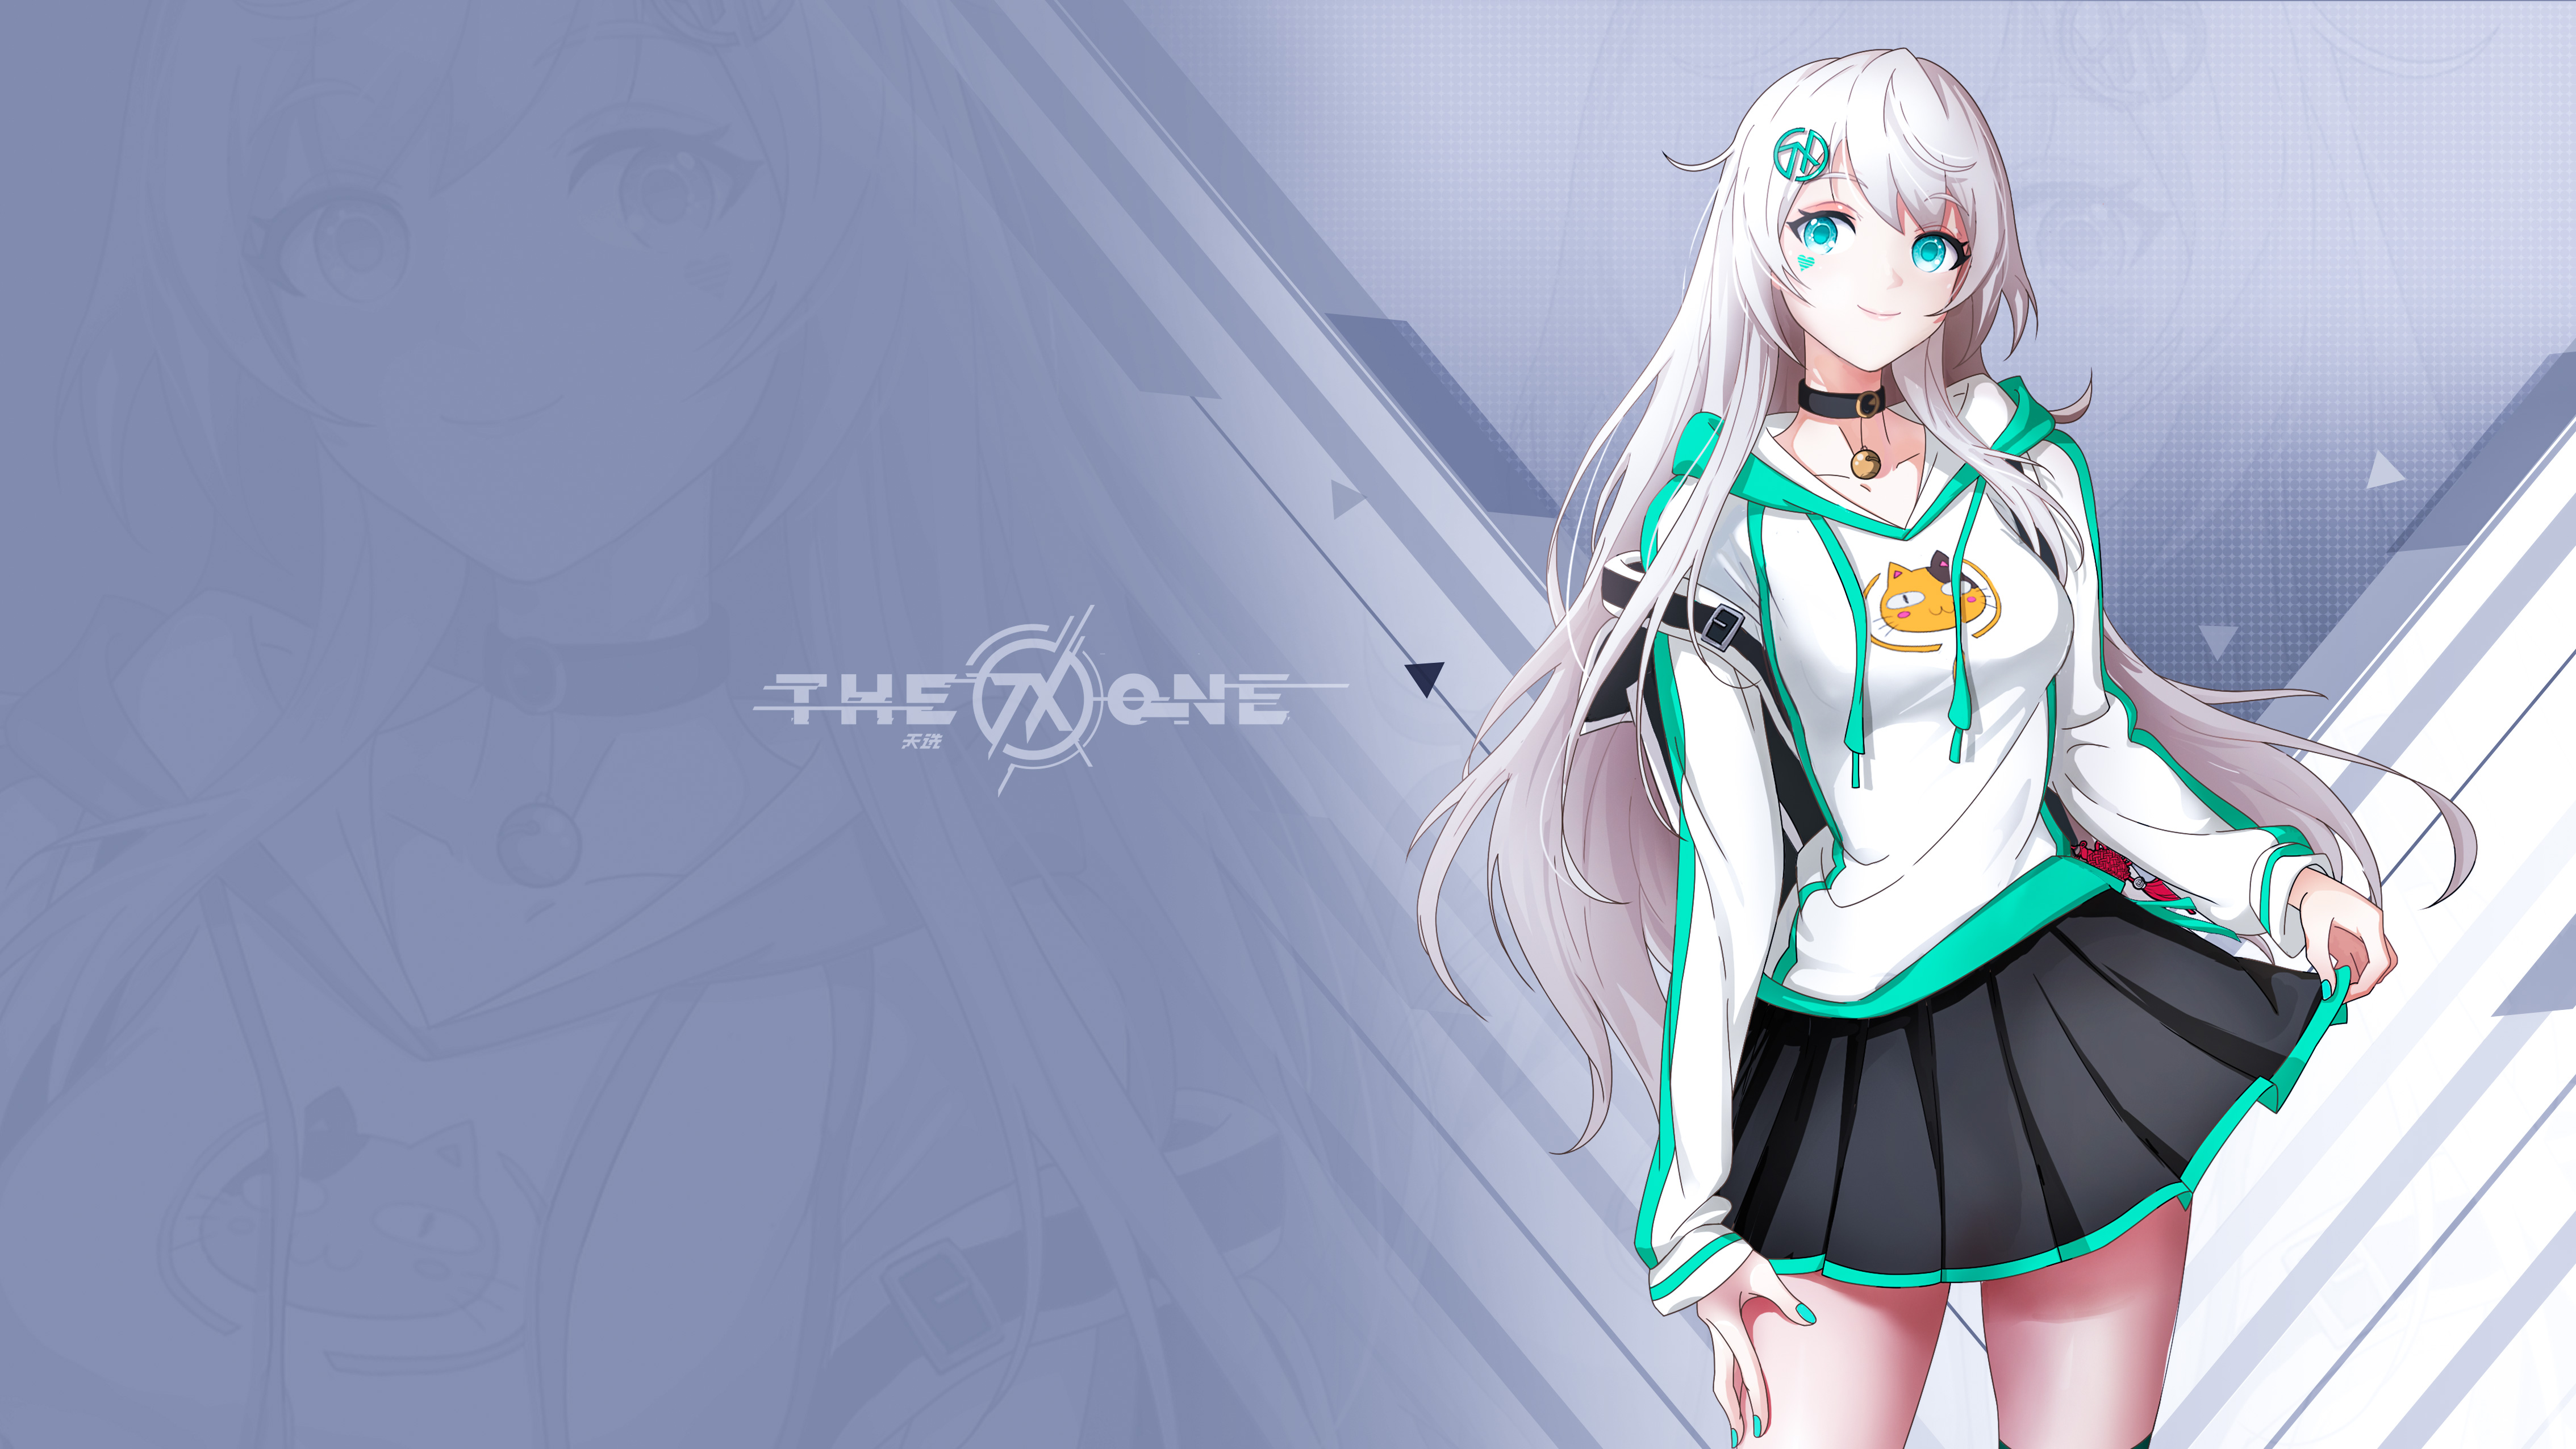 Anime 4535x2551 ASUS The One anime girls